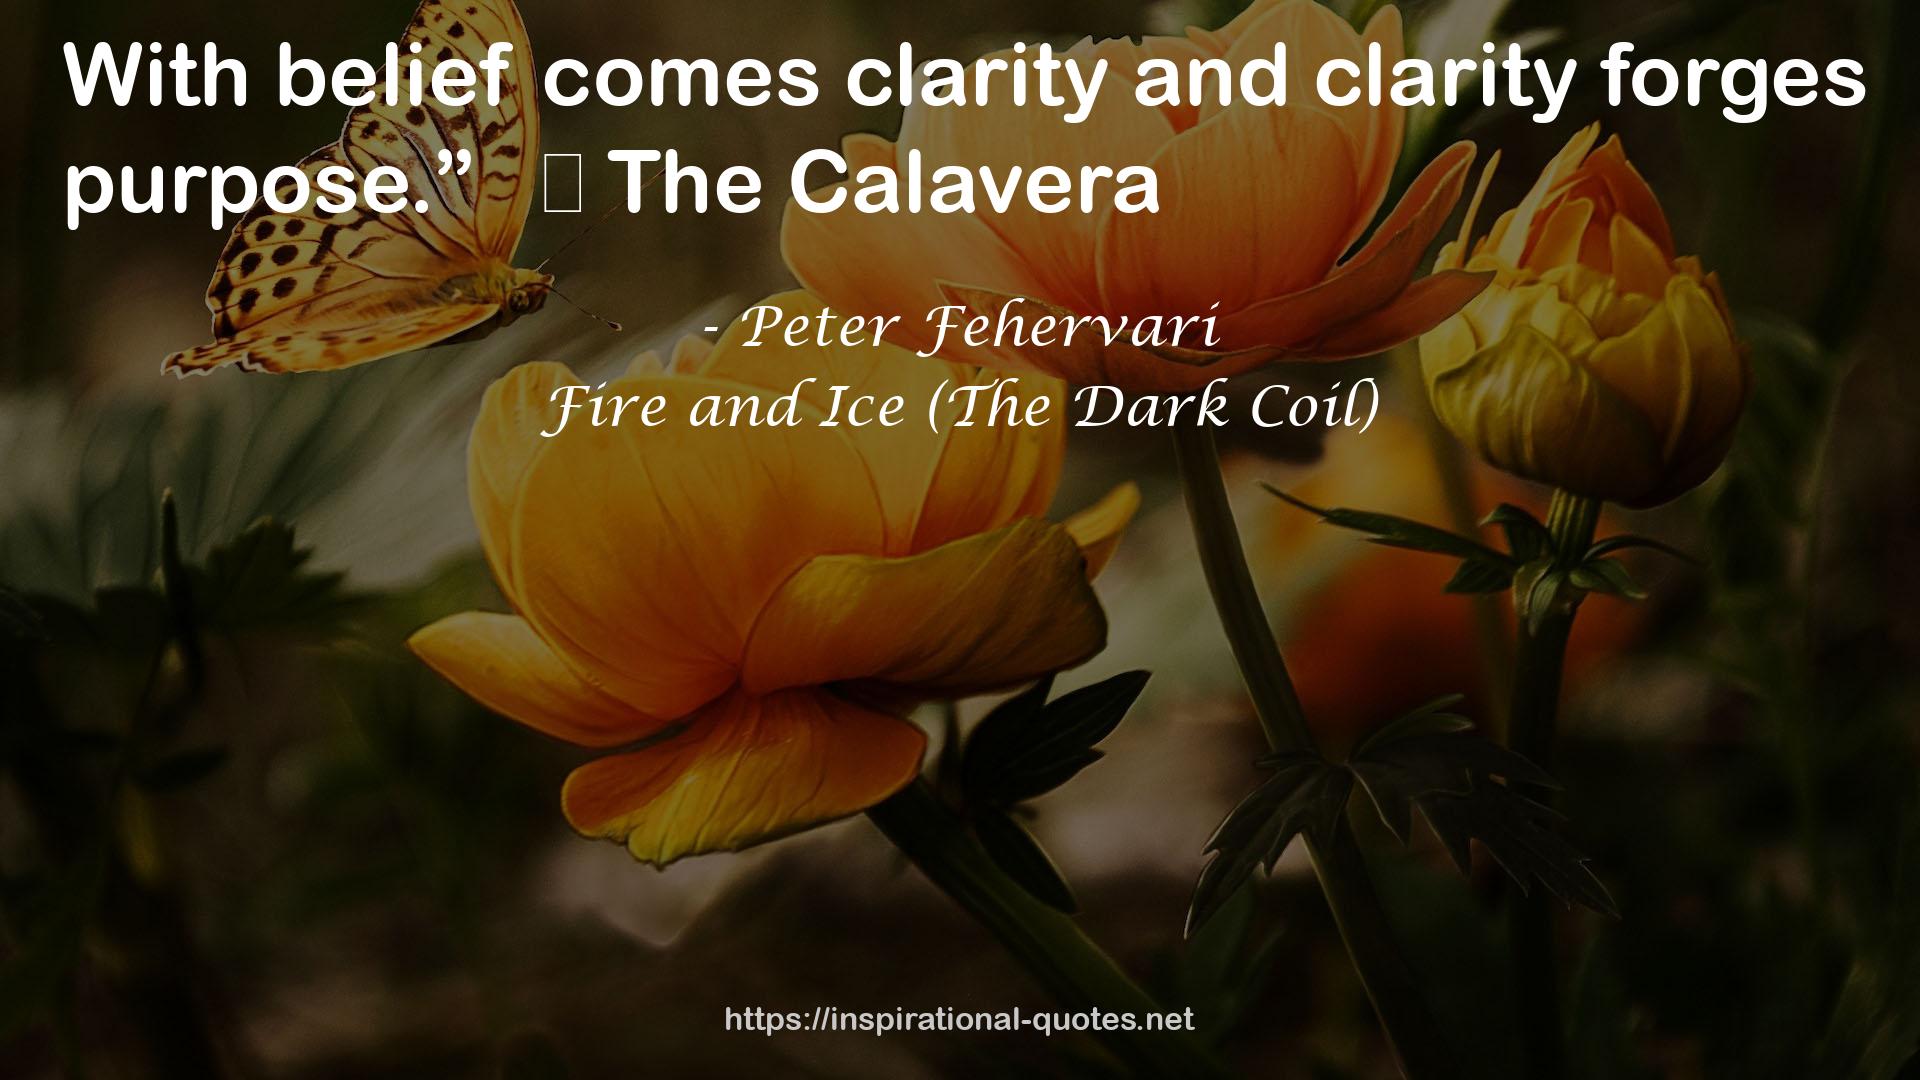 Fire and Ice (The Dark Coil) QUOTES